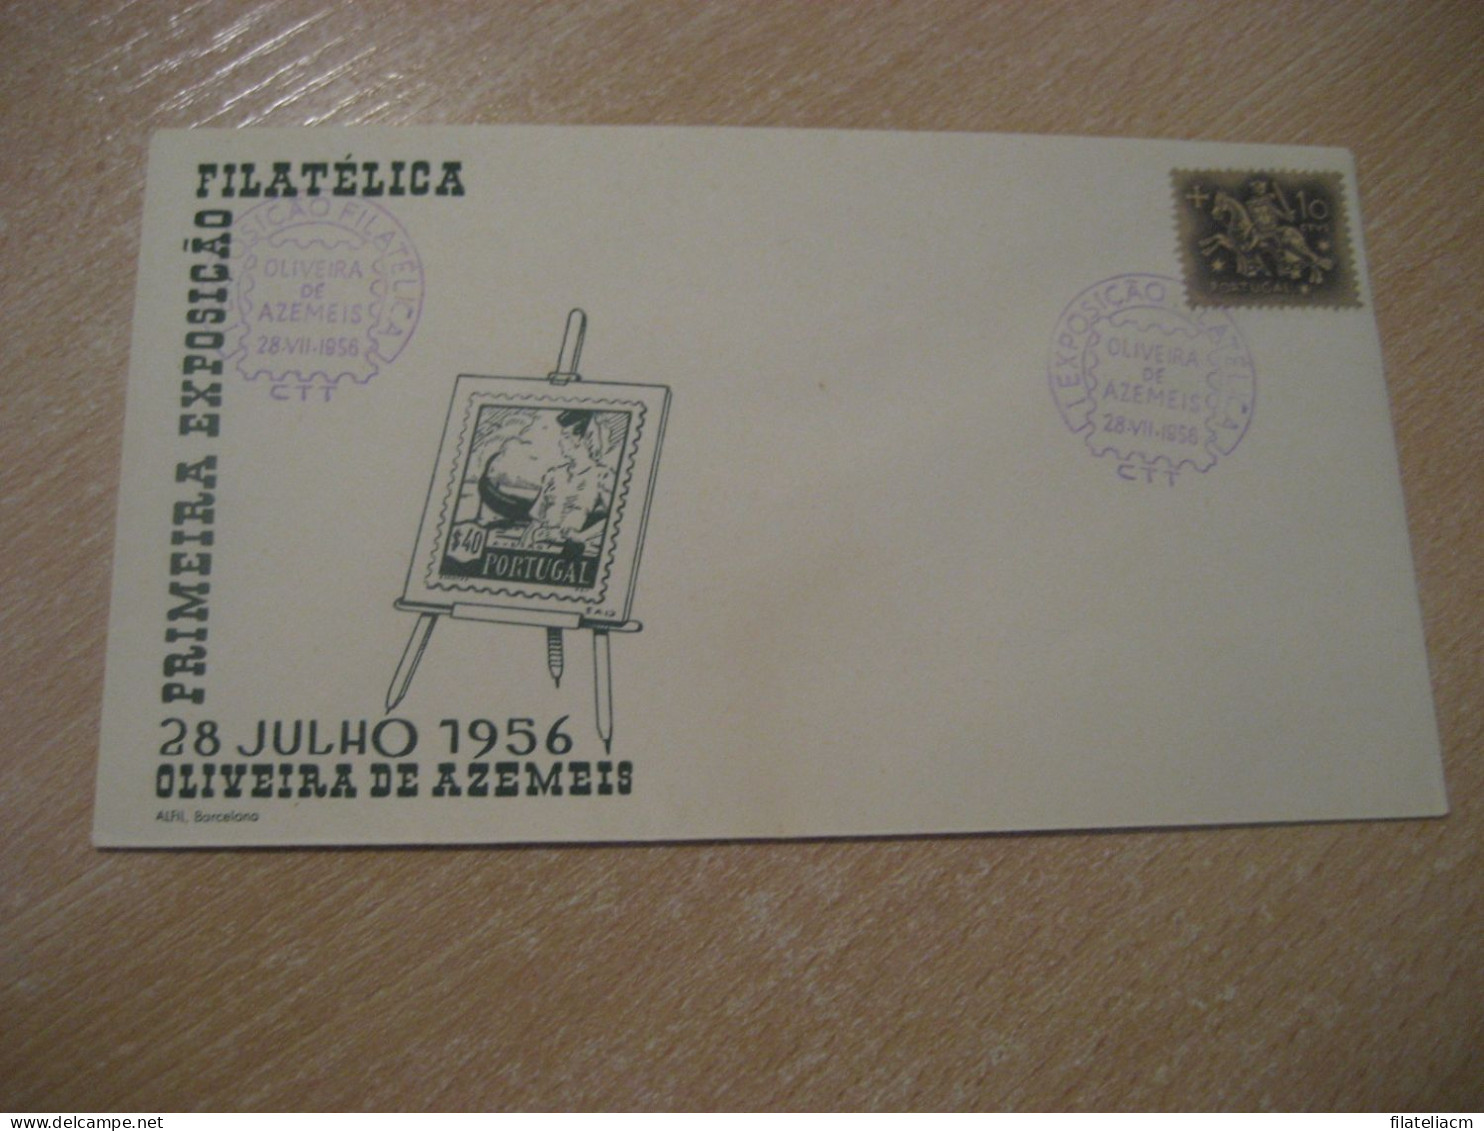 OLIVEIRA DE AZEMEIS 1956 Expo Filatelica Cancel Cover PORTUGAL - Lettres & Documents